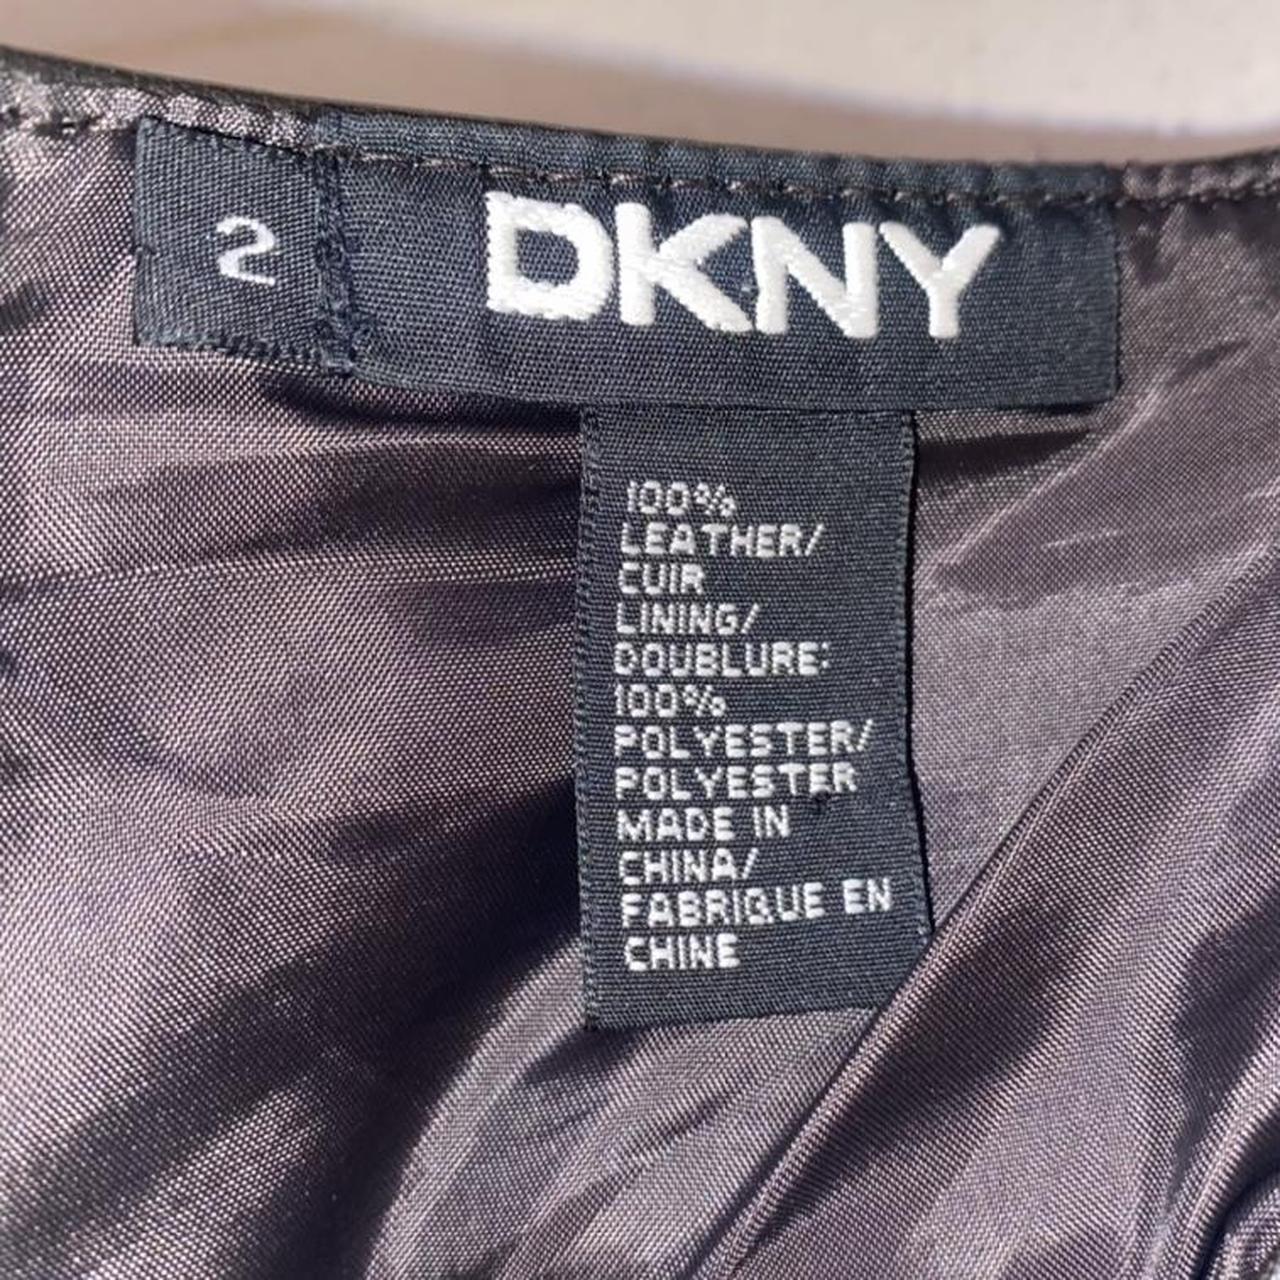 Product Image 4 - Vintage DKNY chocolate brown leather